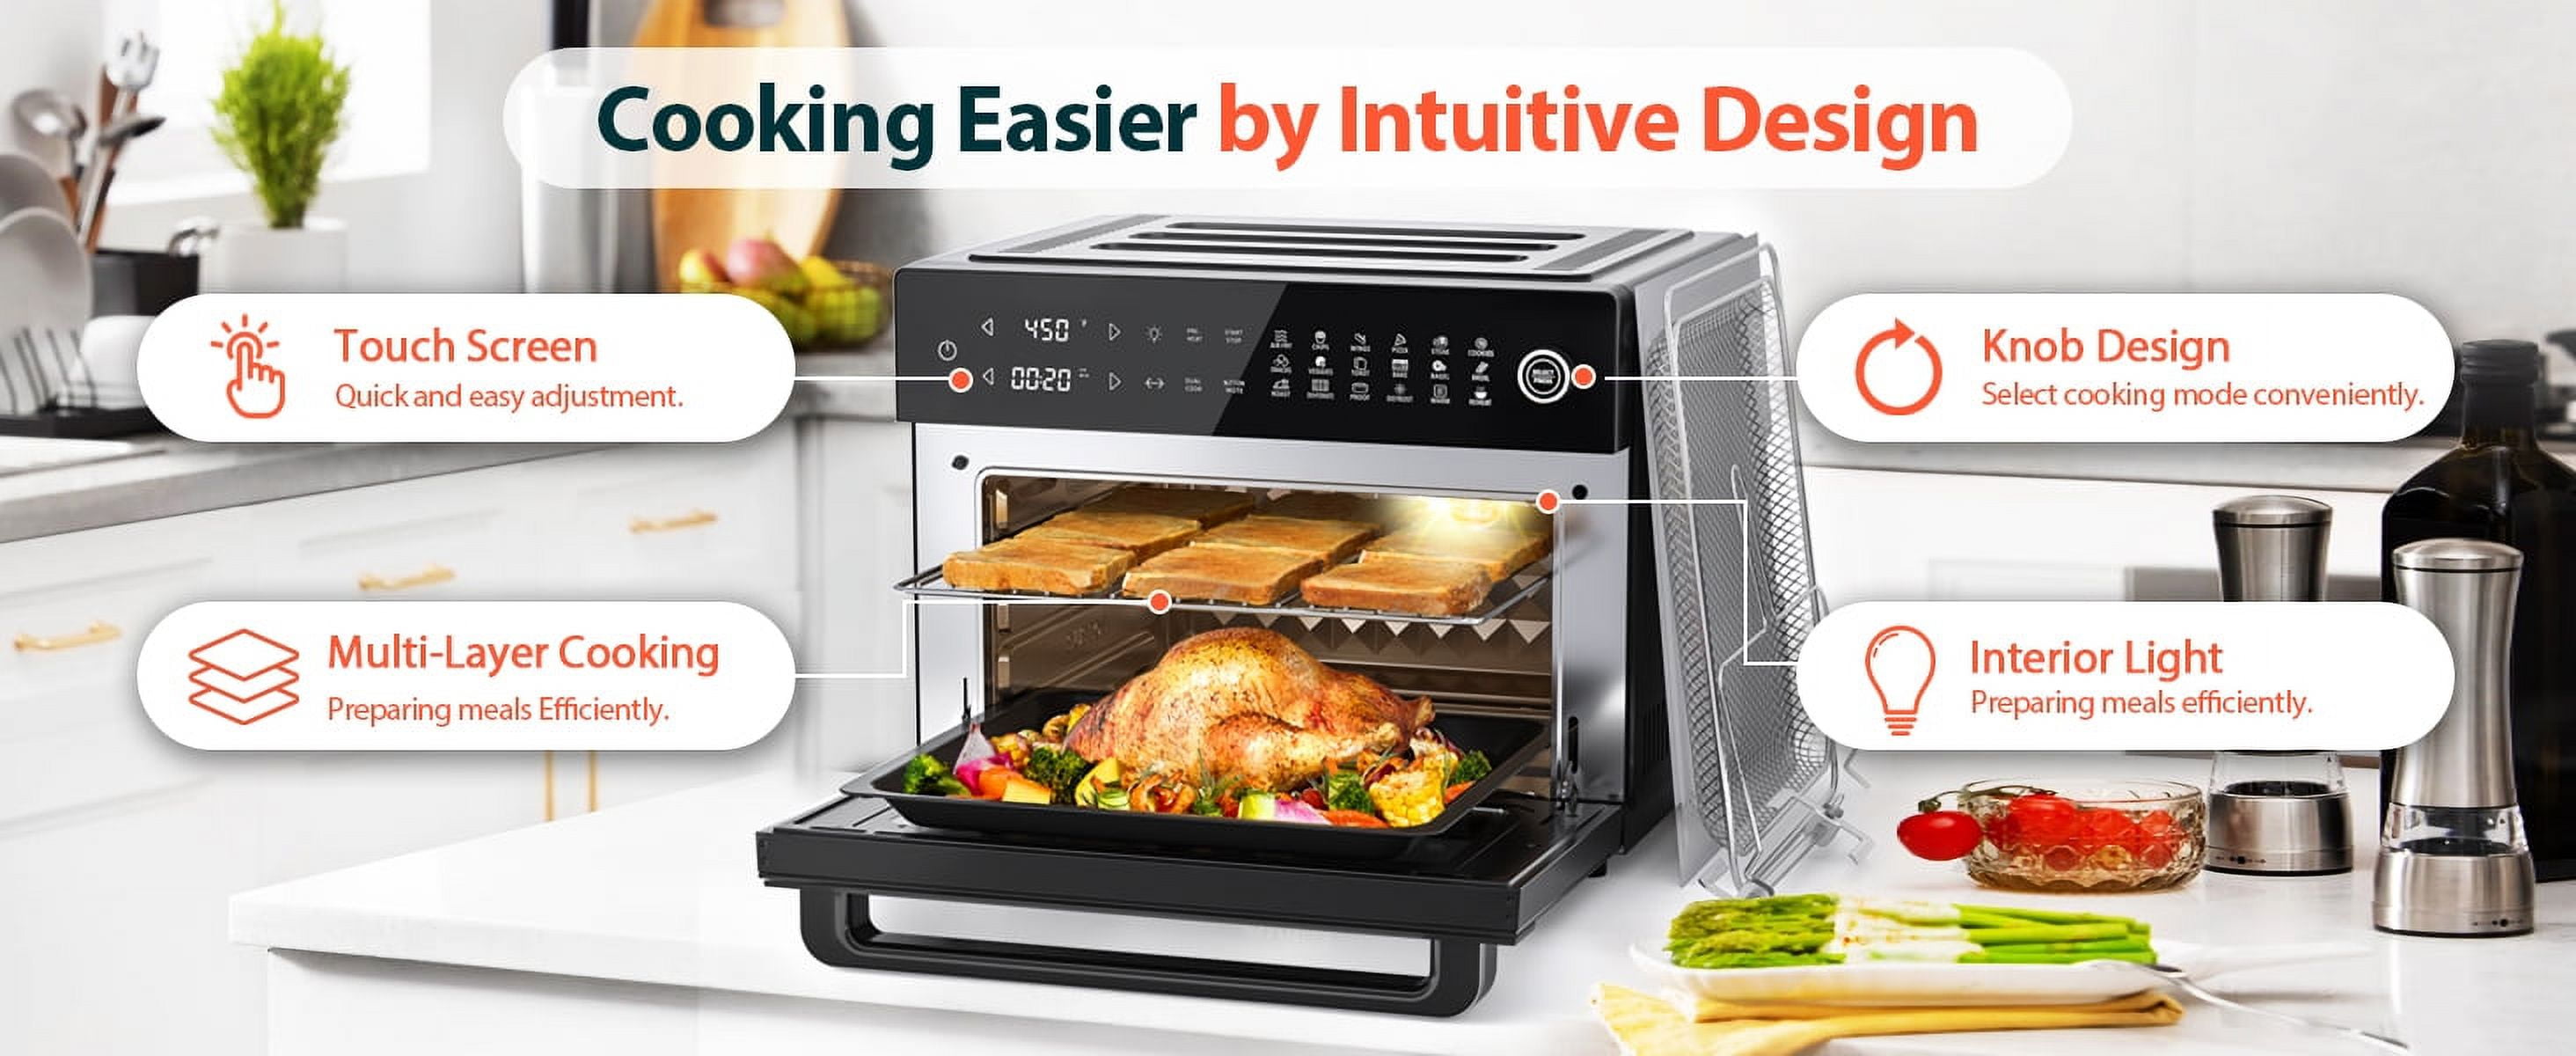 Buy NOVA 32QT Extra Large Air Fryer, 19-In-1 Combo with Rotisserie and  Dehydrator from MyShop.com. ✓ Only Genuine Products ✓ 30 Day Replacement  Guarantee ✓ Free Shipping – NOVA USA